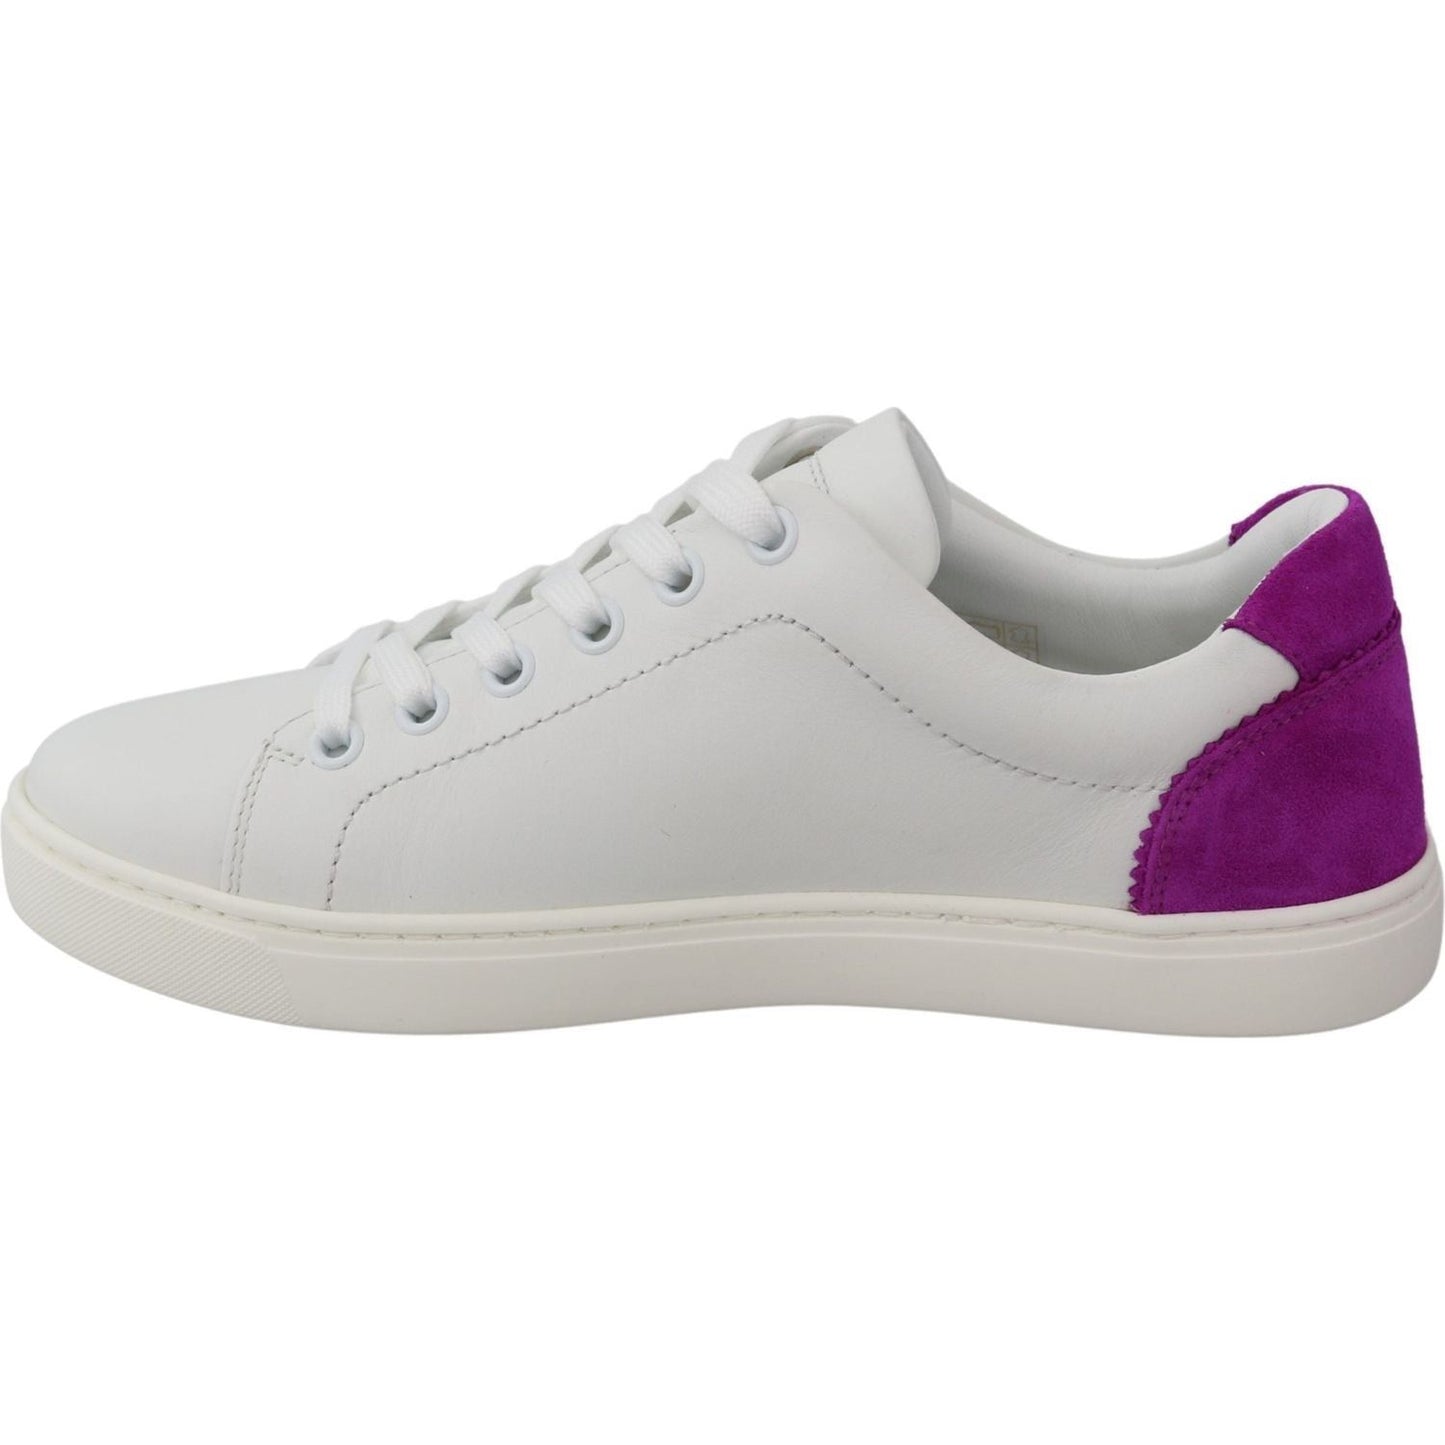 Dolce & Gabbana Chic White Leather Sneakers with Purple Accents WOMAN SNEAKERS white-purple-leather-logo-womens-shoes IMG_9738-a36369c3-988.jpg